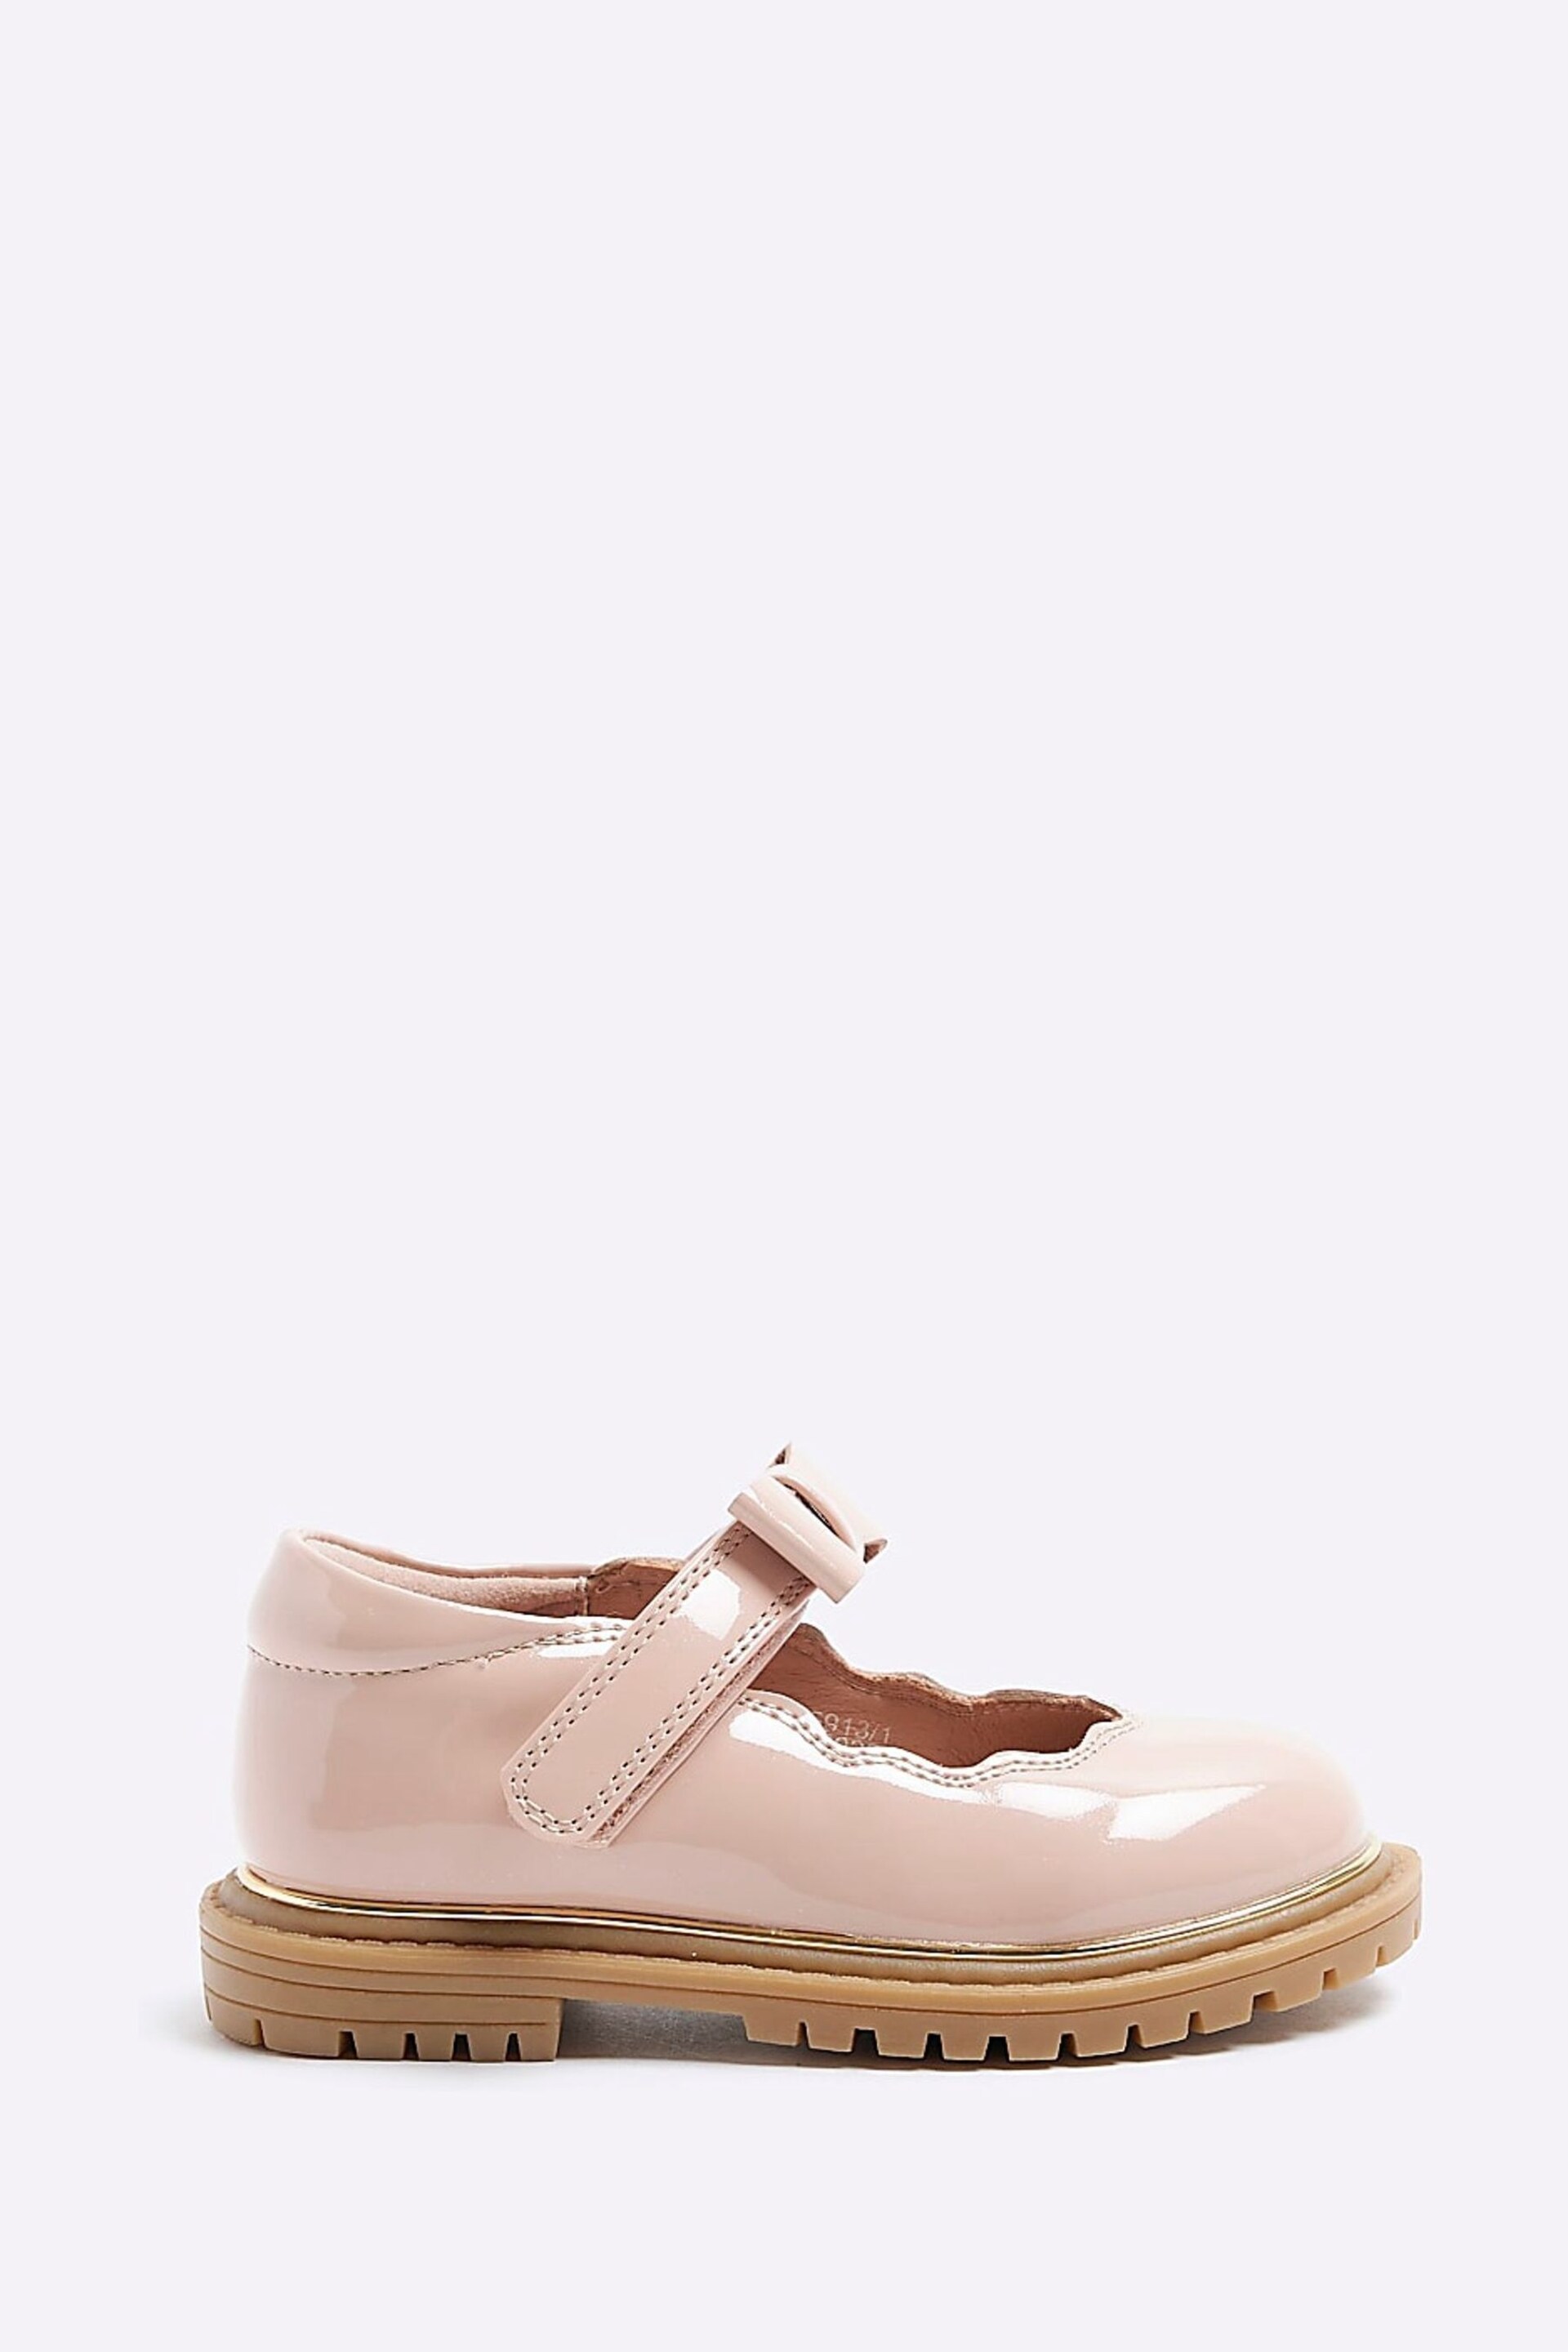 River Island Pink Girls Scallop Bow Mary Jane Shoes - Image 1 of 5